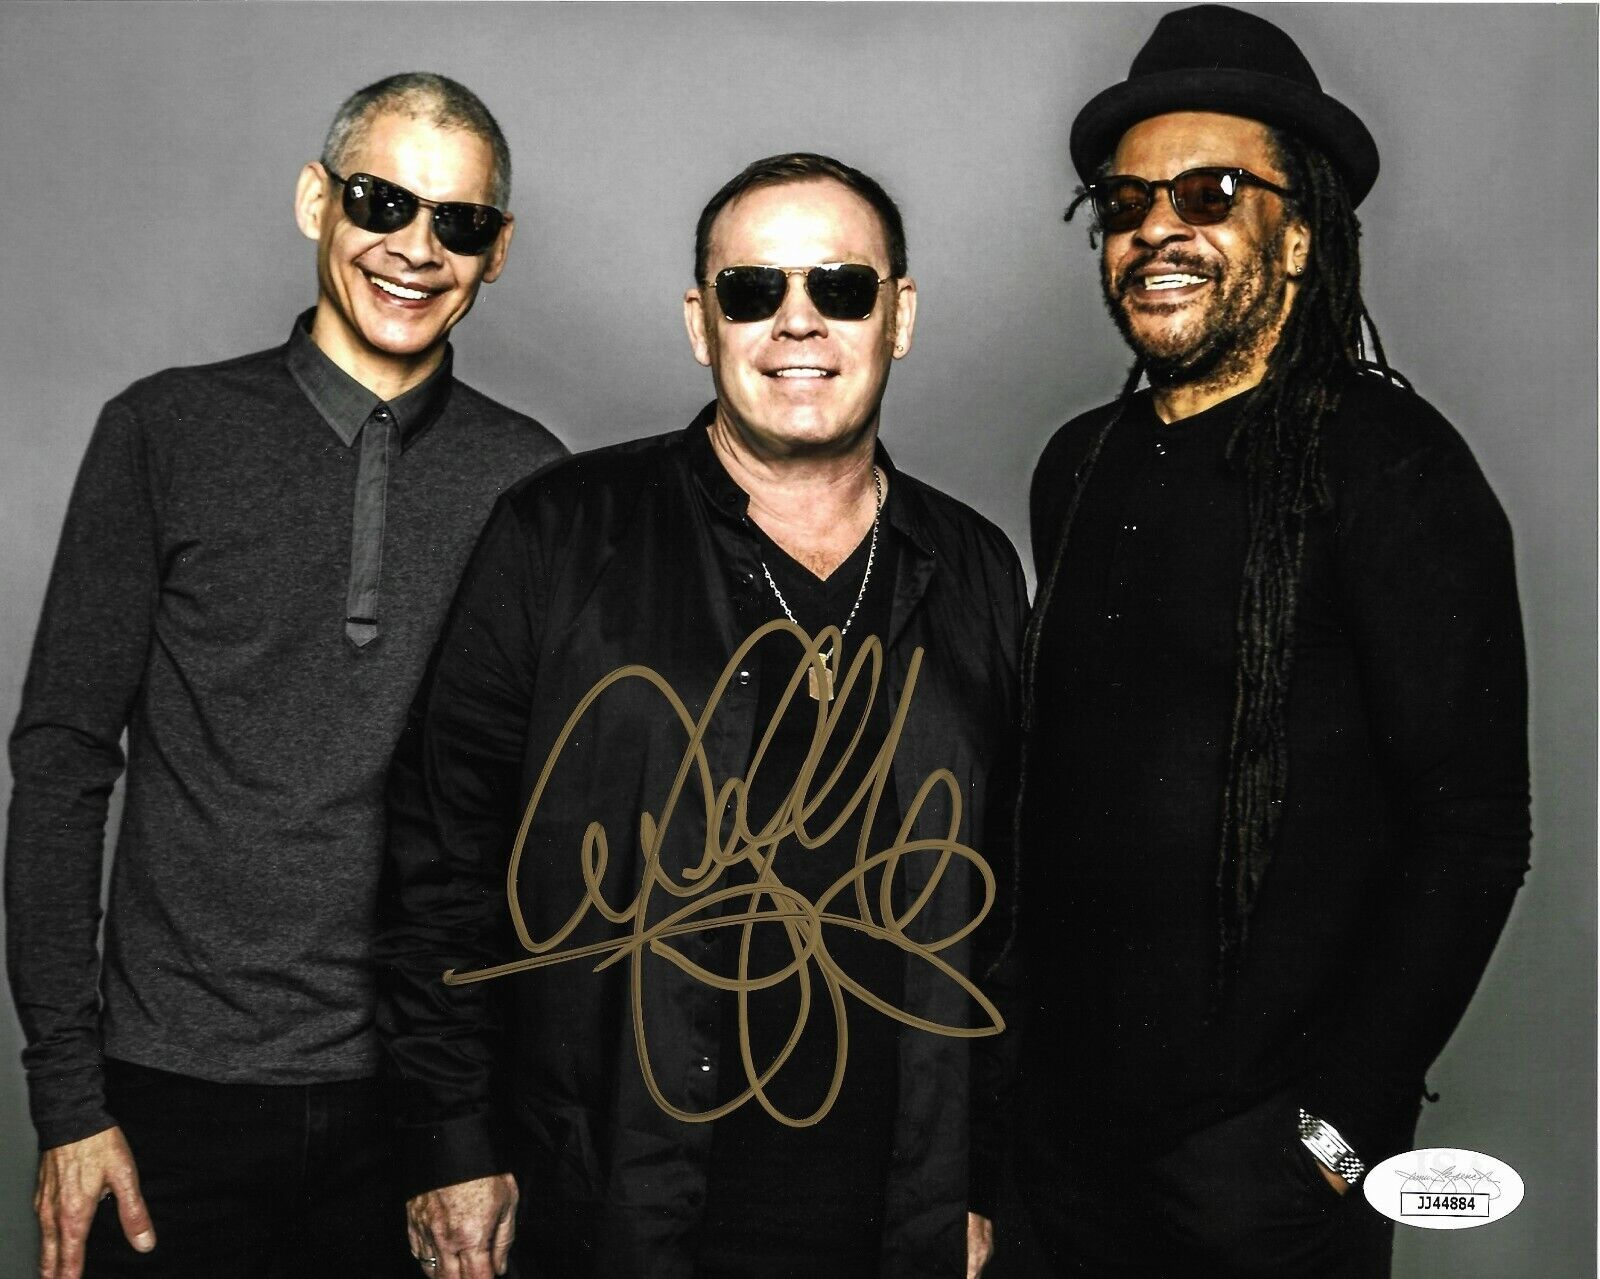 Ali Campbell Signed 8x10 Photo Poster painting JSA COA Autograph Alistair Singer Band UB40